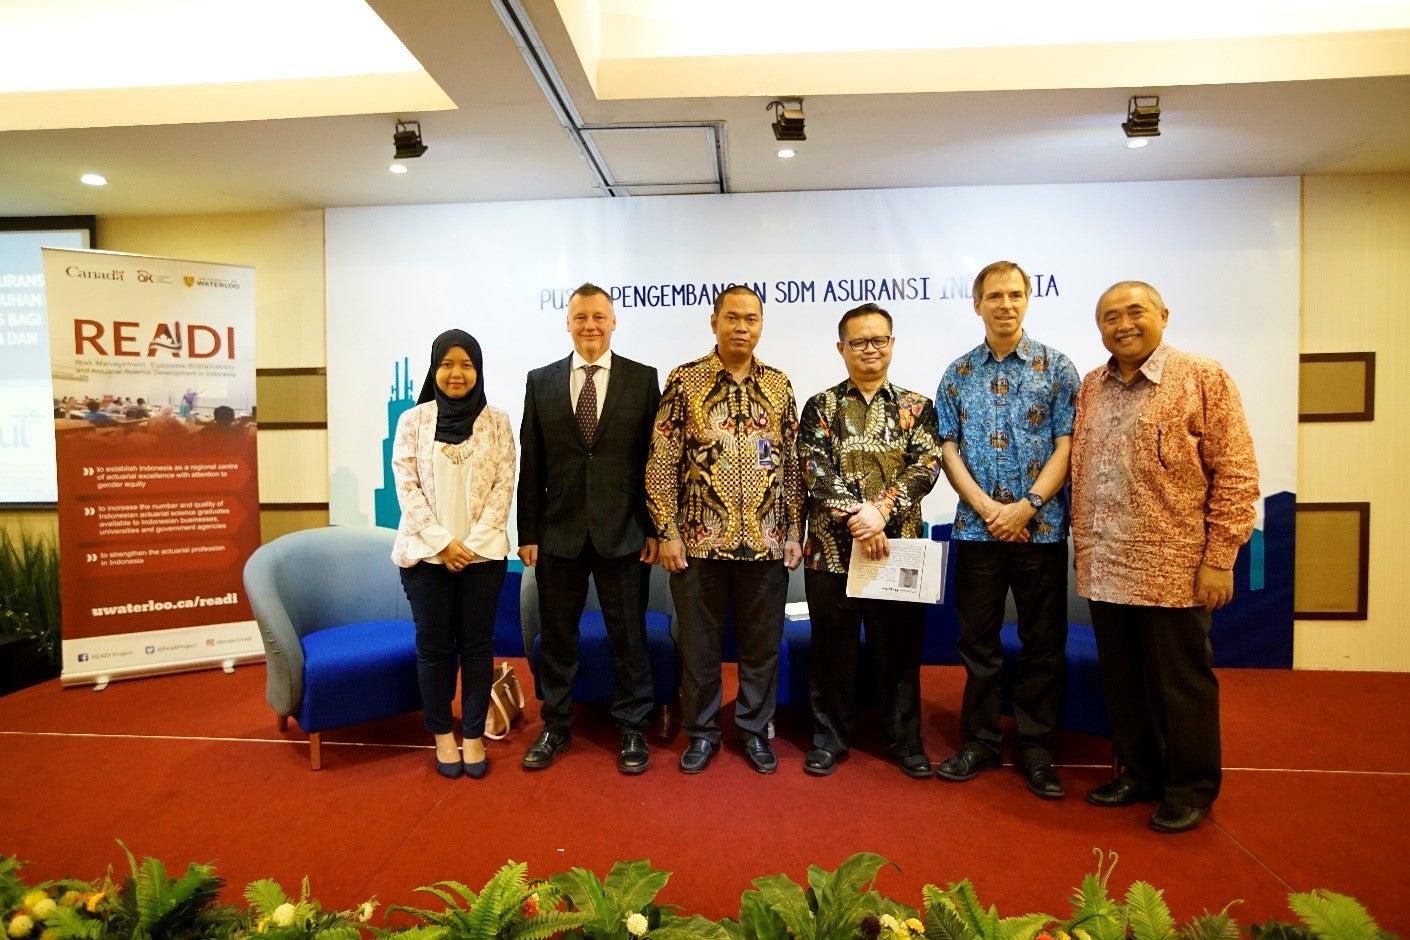 Left to right: Ms. Dini Hardini (Actuary Manager-Allianz); Mr. Matthew Maguire (President of the Singapore Actuarial Society);  Mr. Rianto (Head of General Insurance Supervision-OJK); Mr. Masdar (Director of Avrist Insurance); Mr. Bill Duggan (READI-Field Director) and Mr. Dadang Sukresna (Chairman of AAUI). 